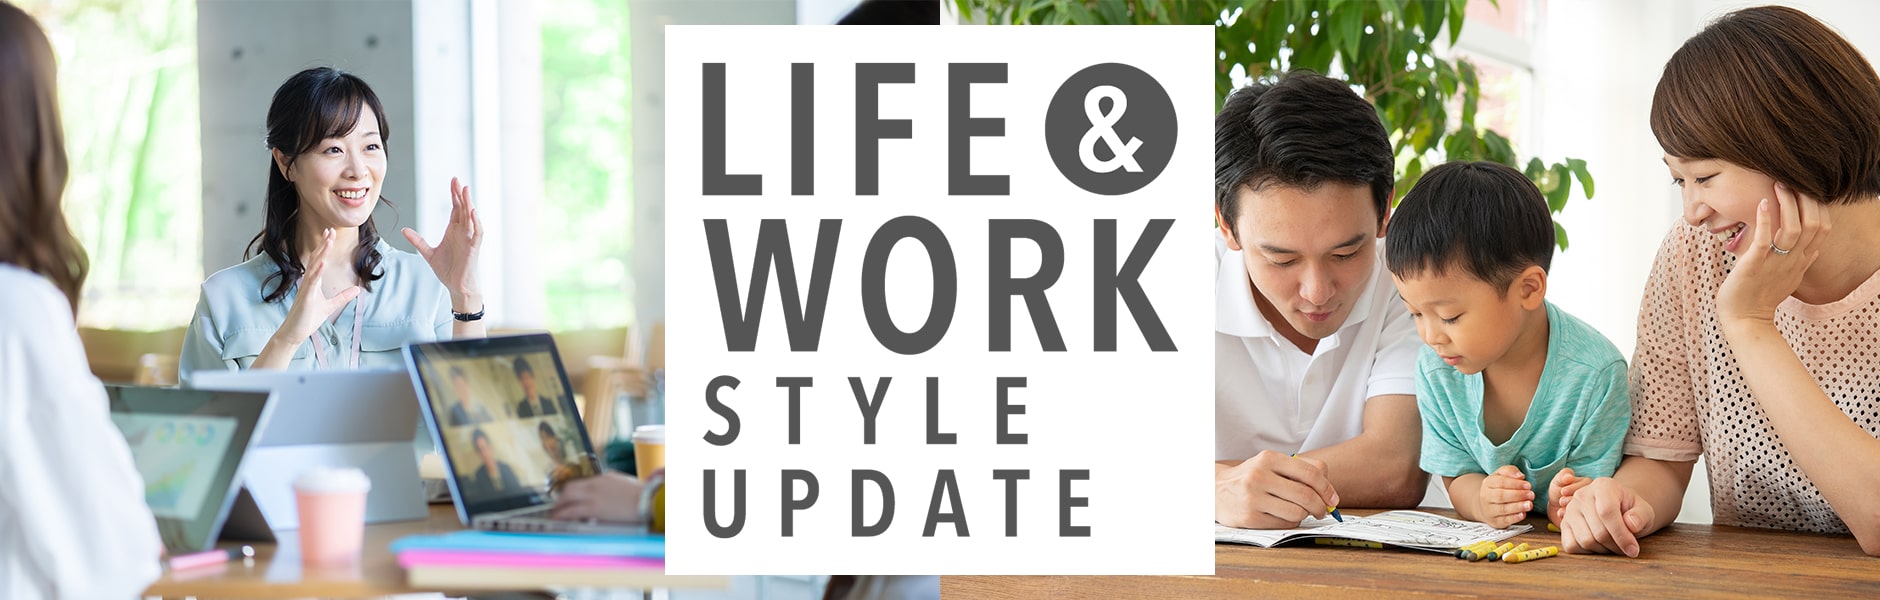 LIFE & WORK STYLE UPDATE